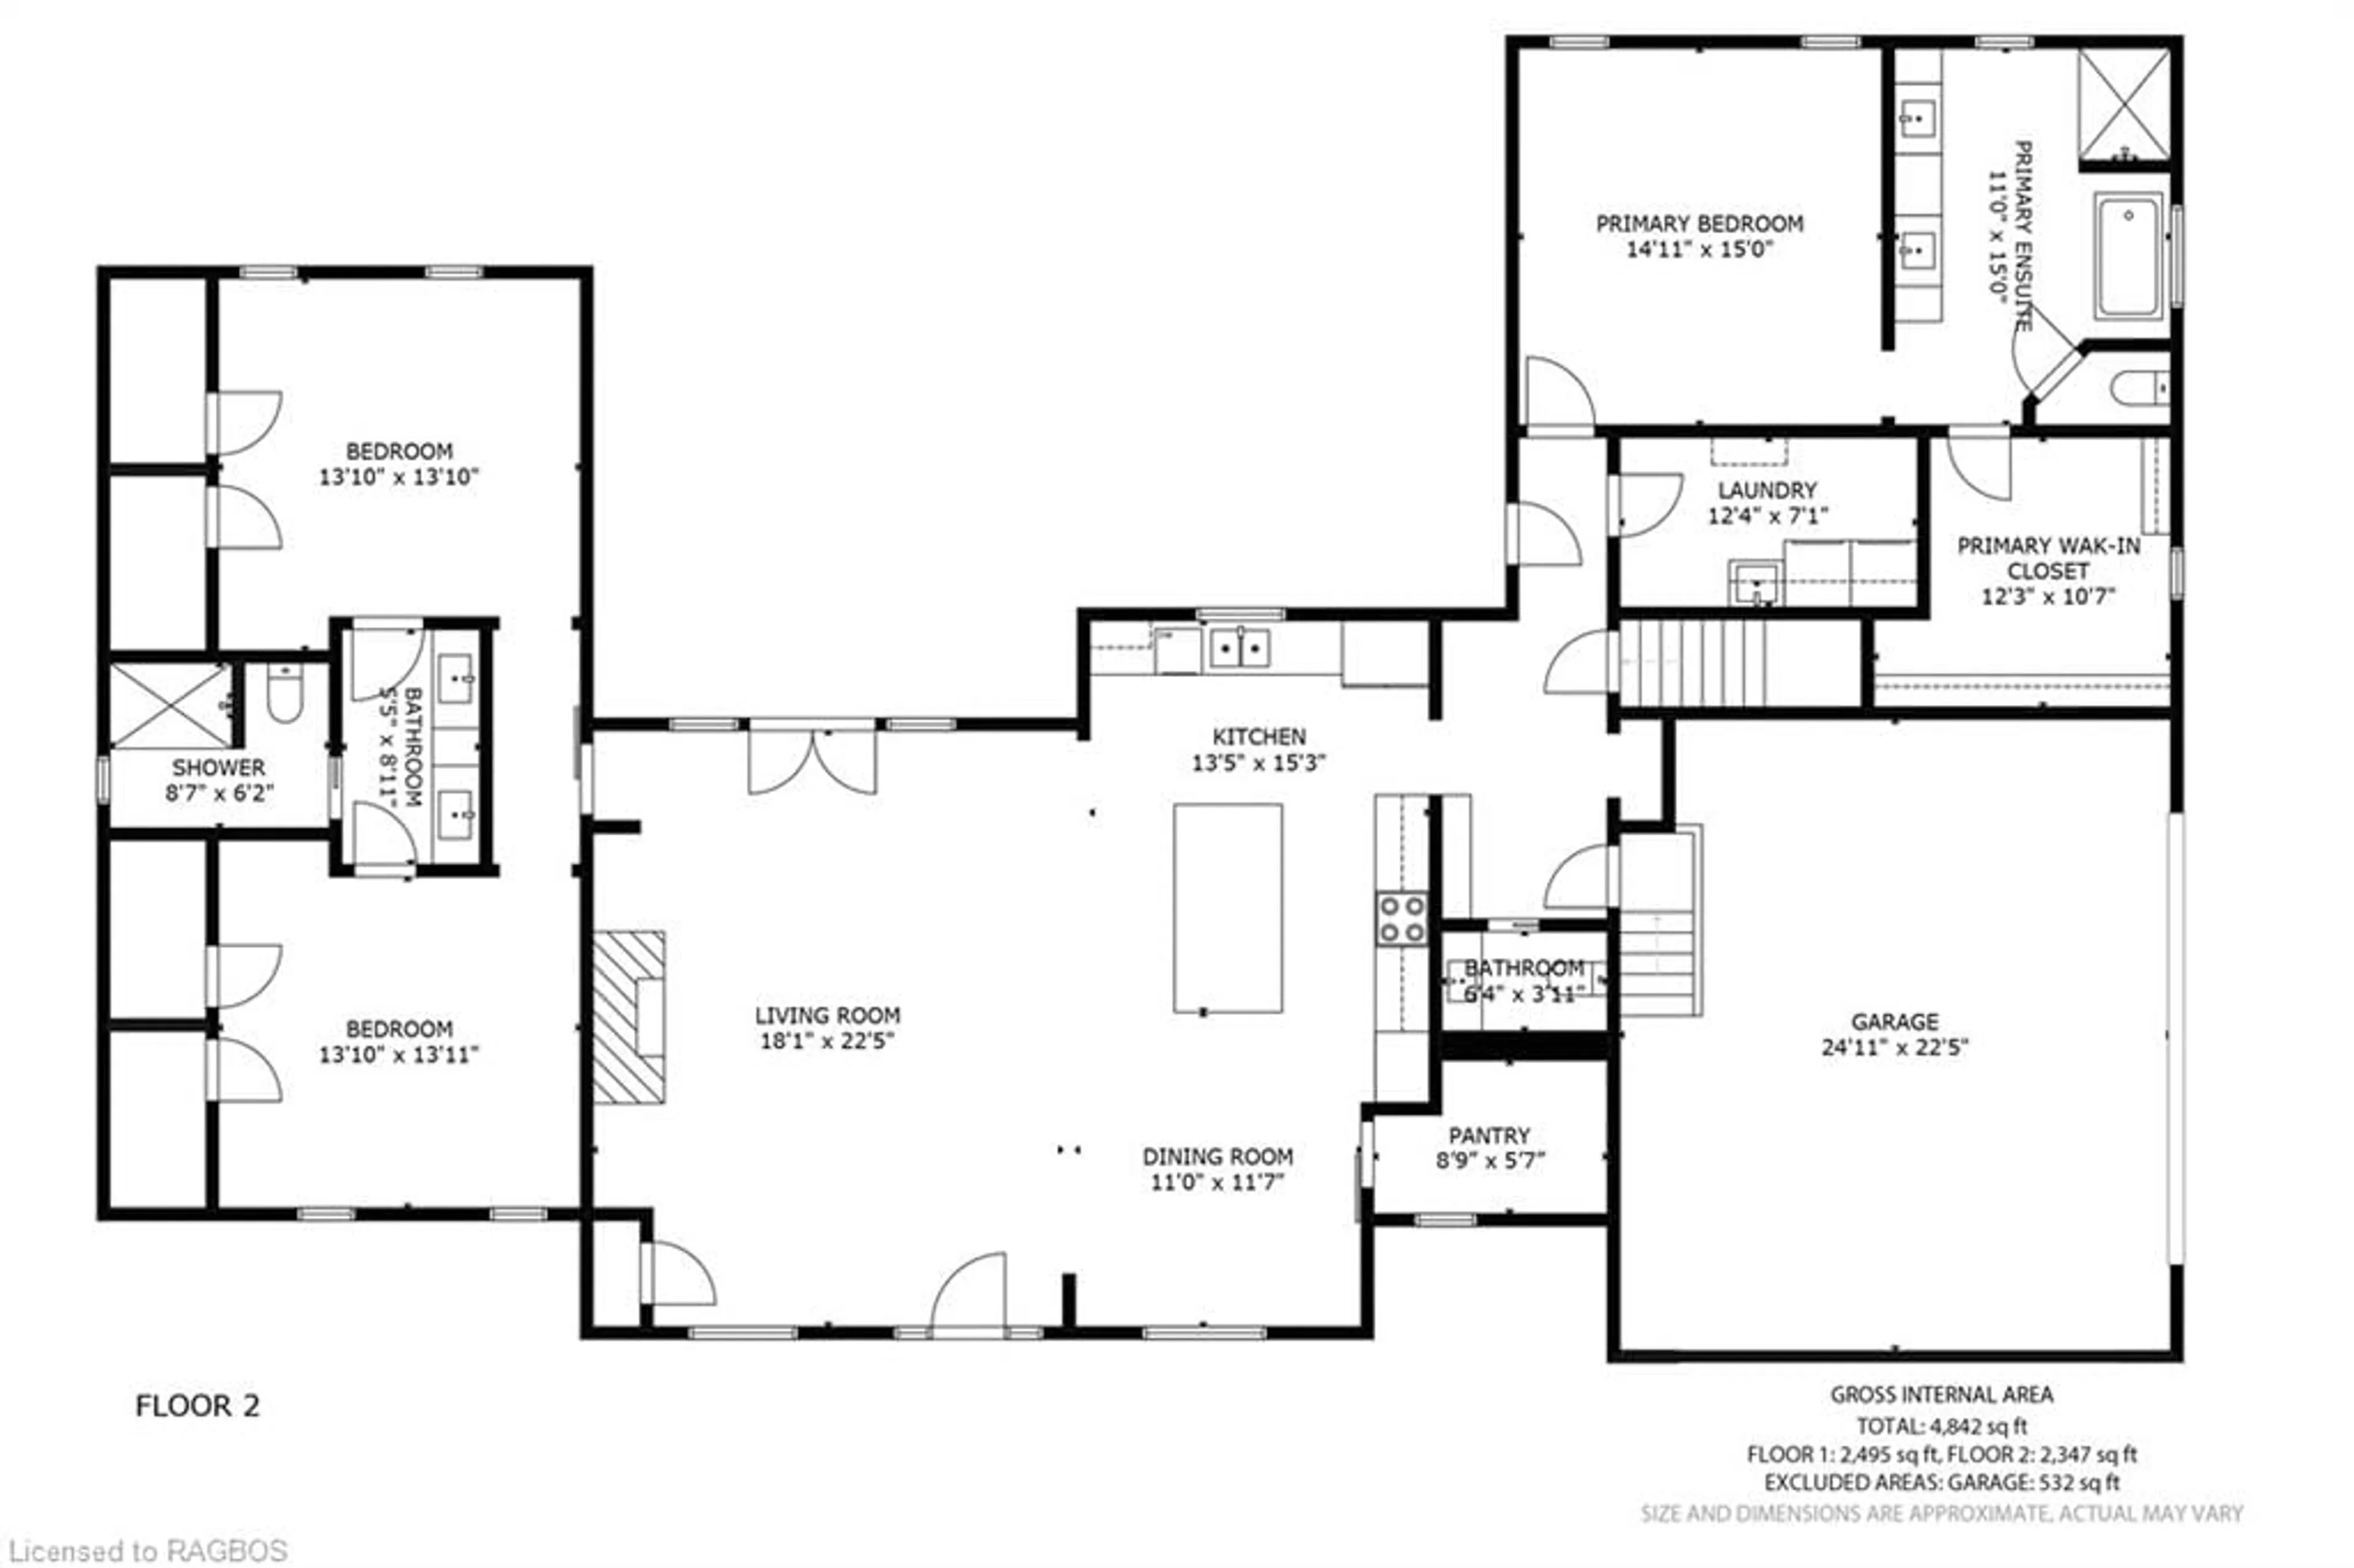 Floor plan for 423474 Concession 6 Rd, West Grey Ontario N0G 1R0